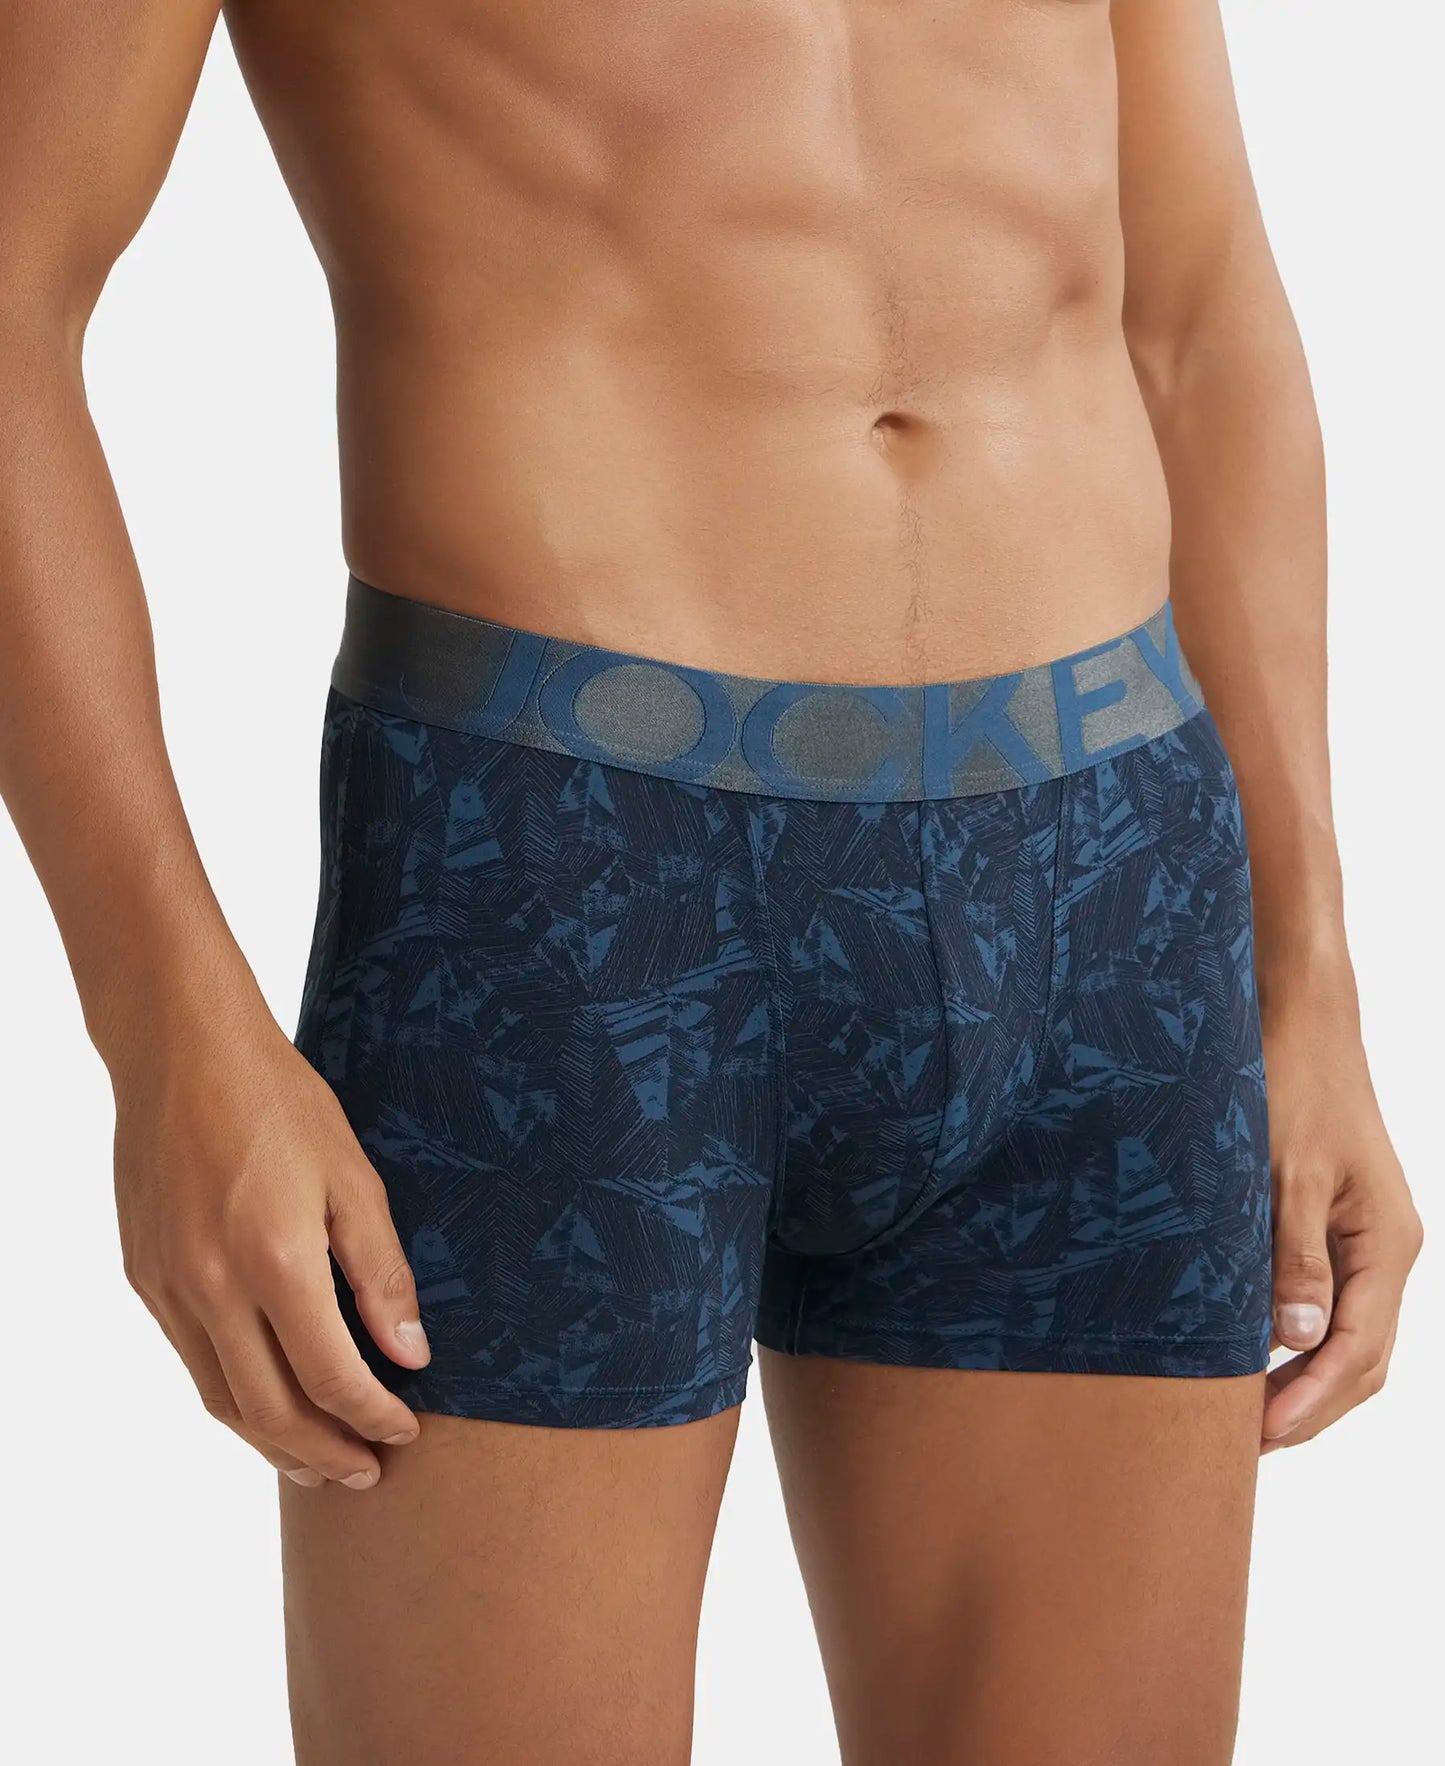 Tencel Micro Modal Elastane Printed Trunk with Natural StayFresh Properties - Potent Purple-2